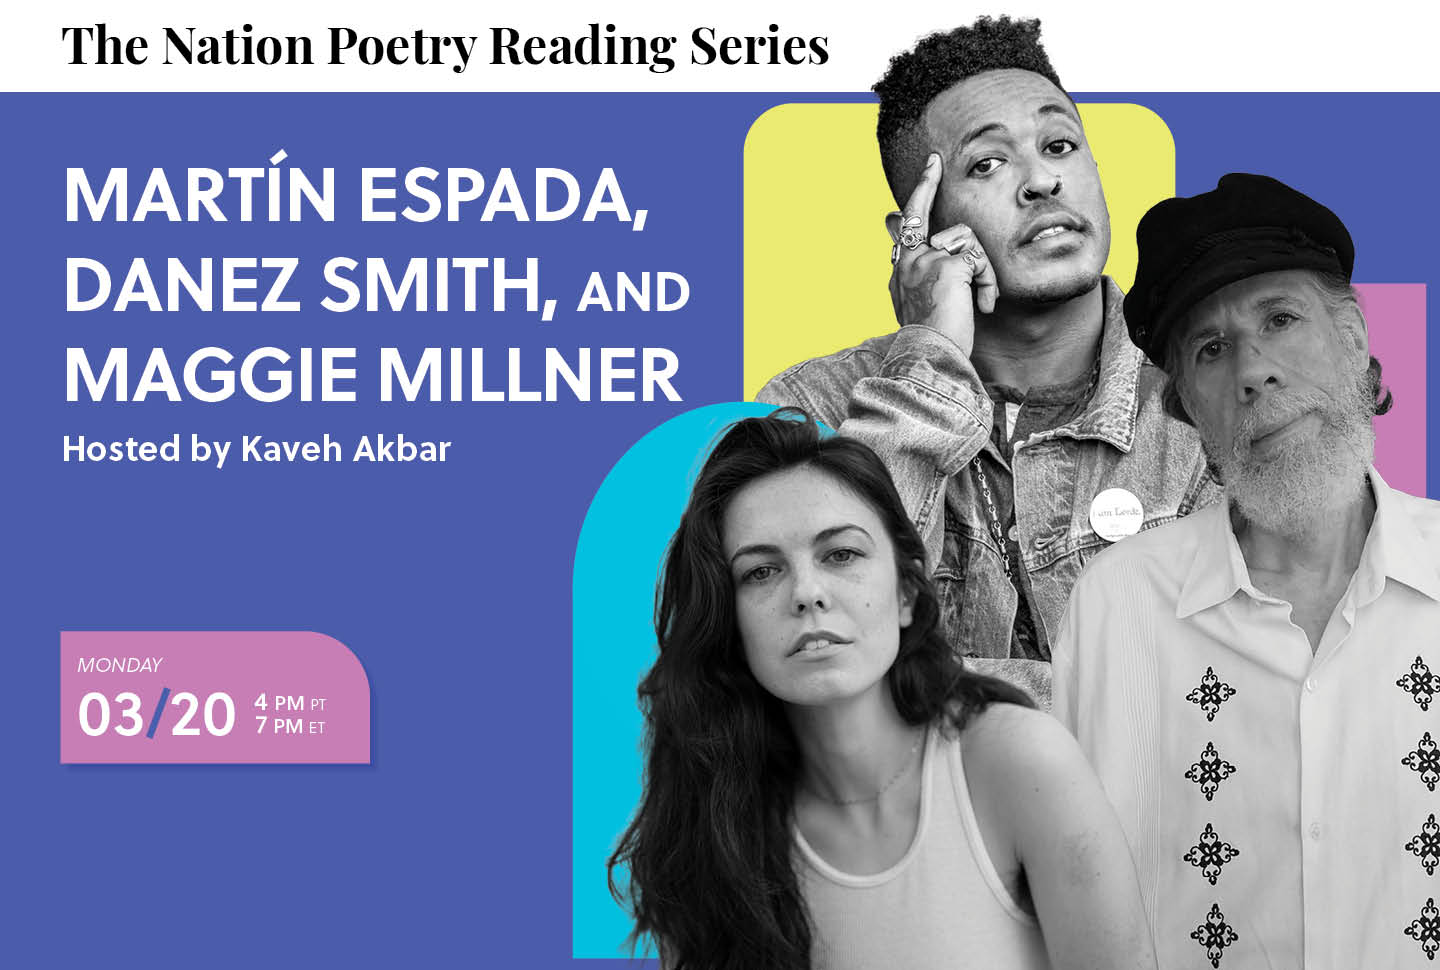 The Nation Poetry Reading Series Presents: Martín Espada, Danez Smith, and Maggie Millner